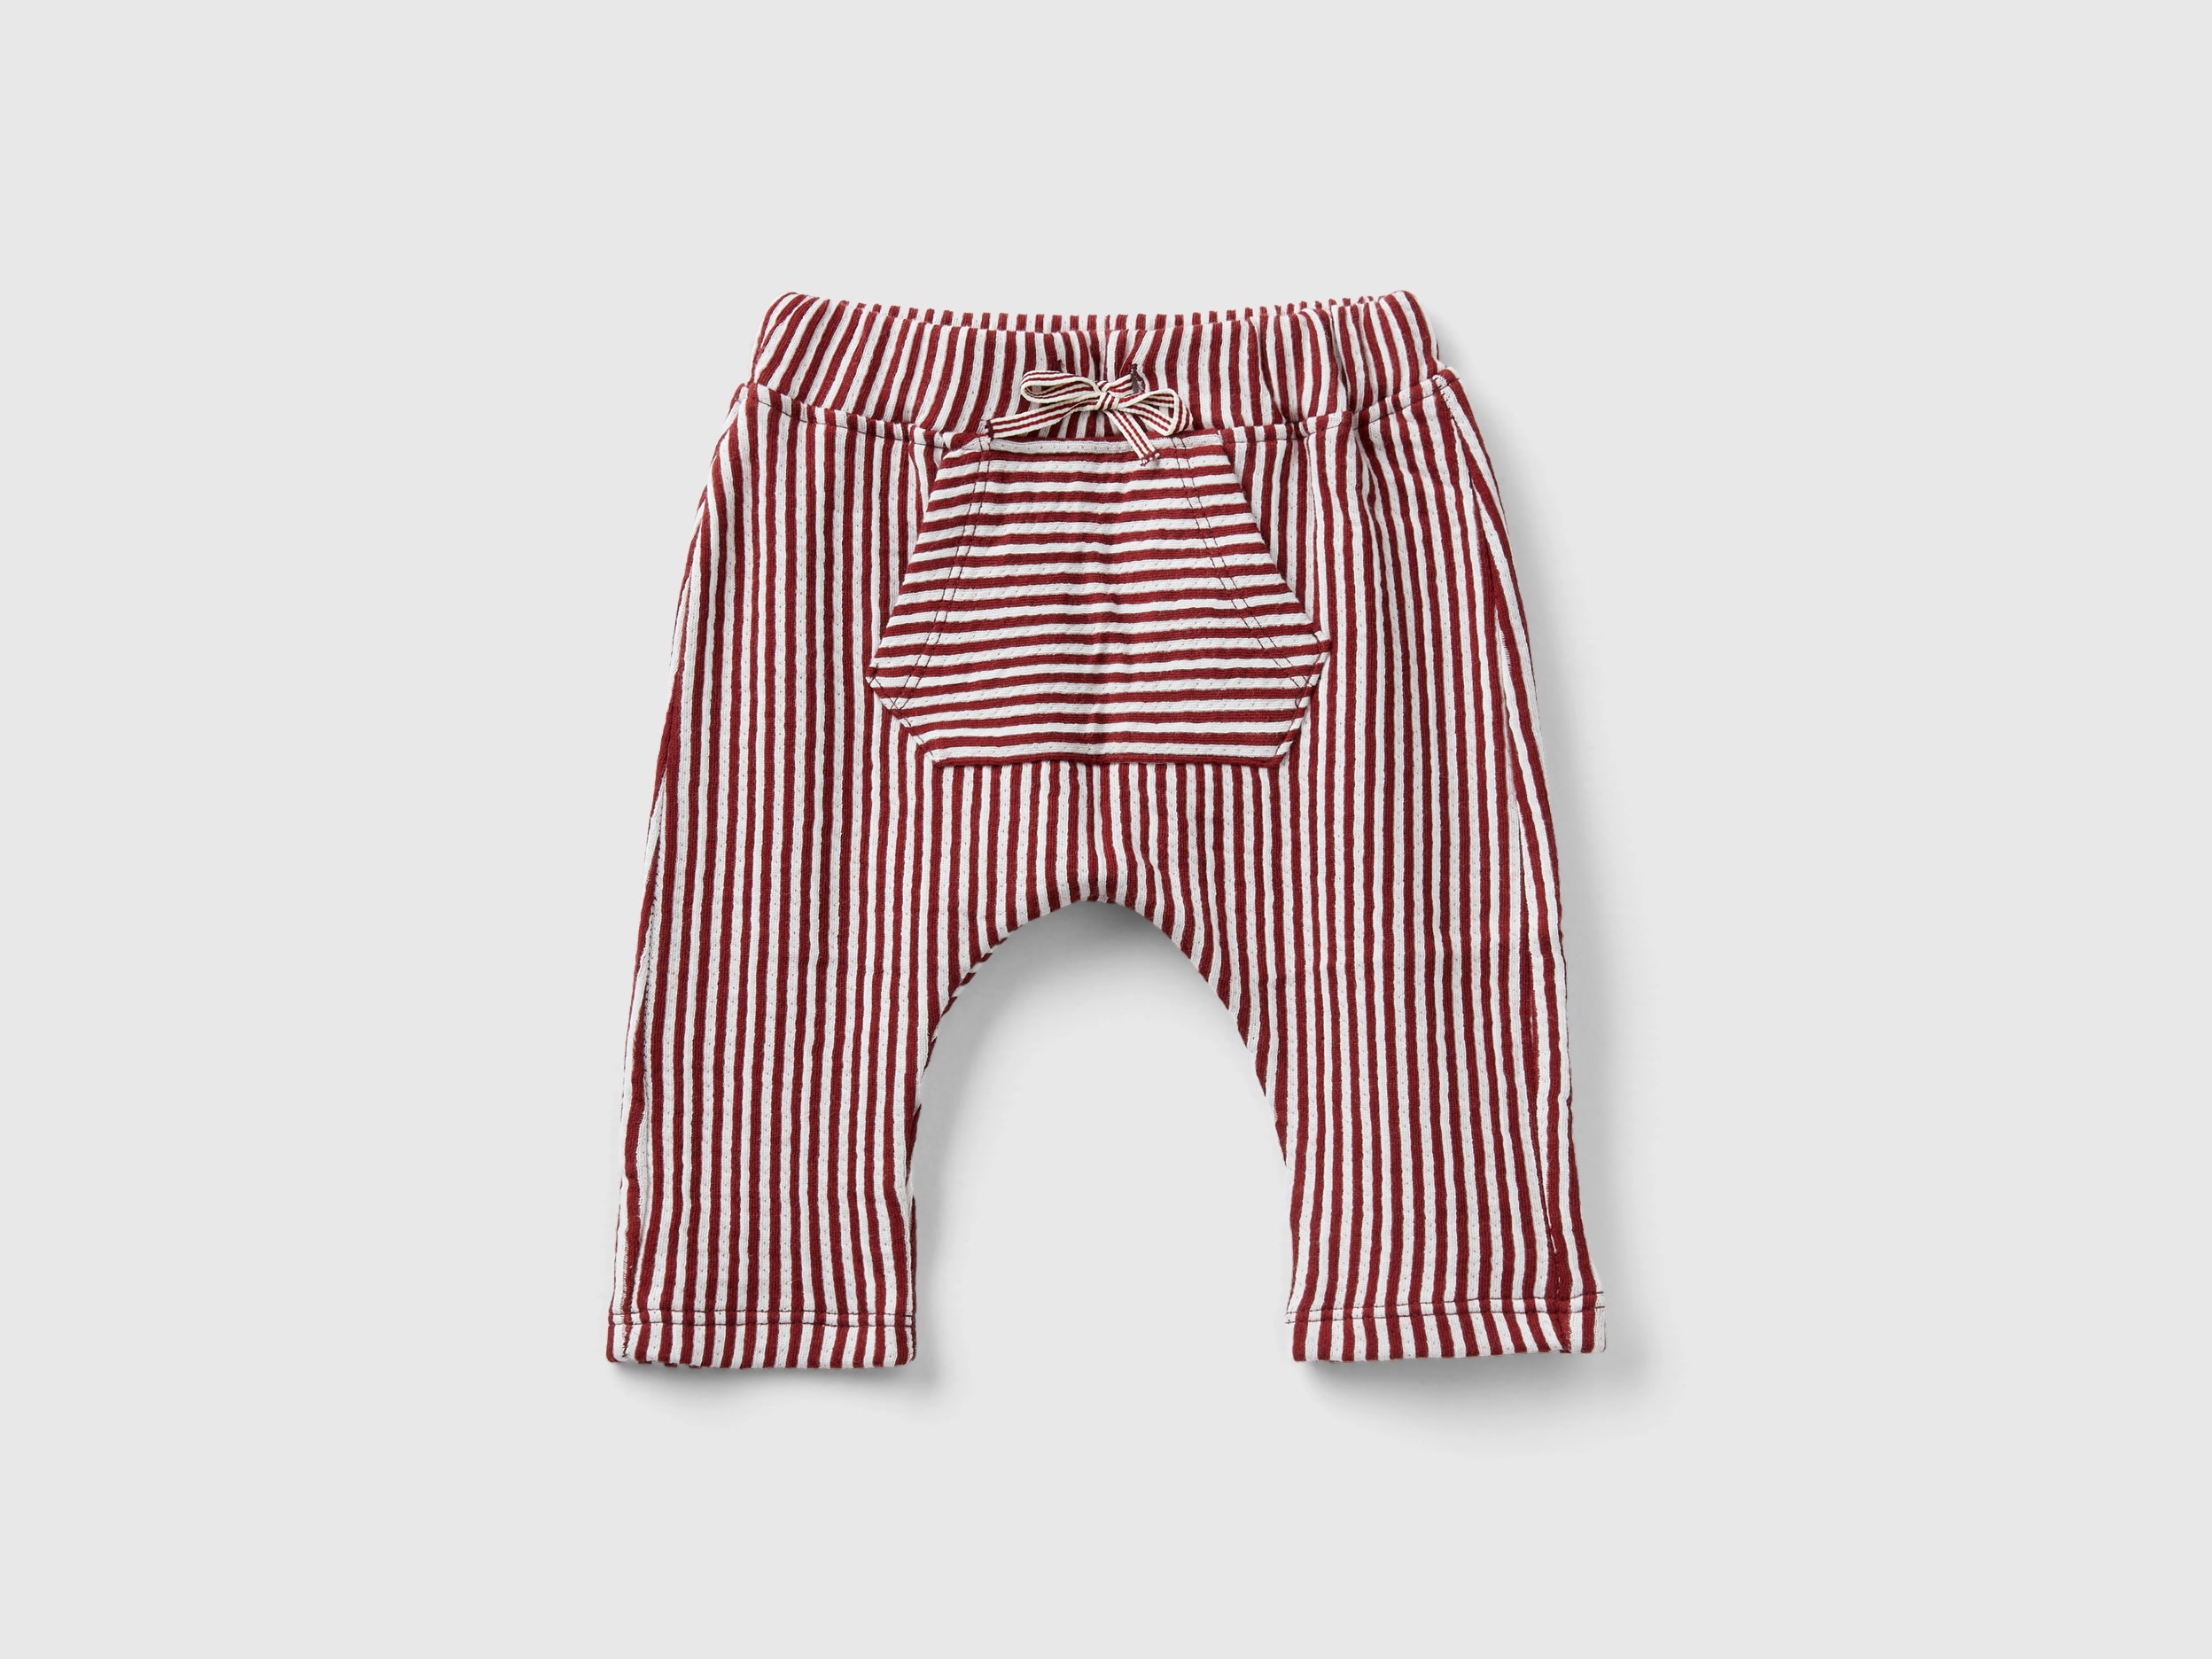 Benetton, Striped Trousers With Pocket, size 6-9, Burgundy, Kids